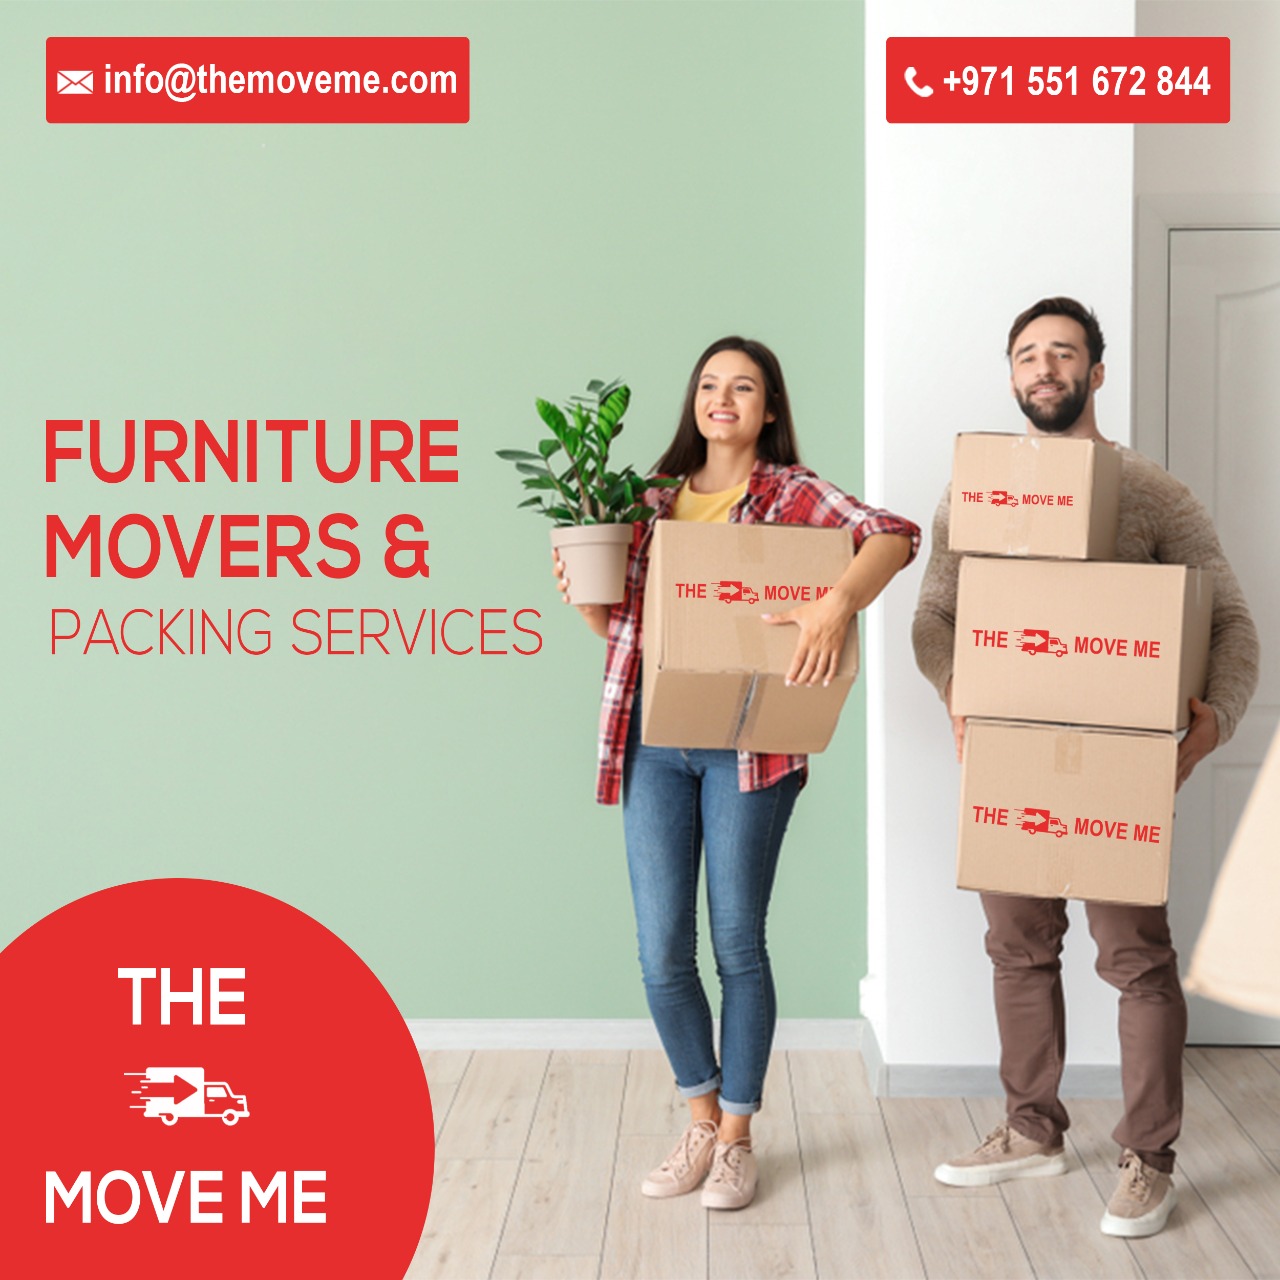 TheMoveMe Movers and Packers In Dubai